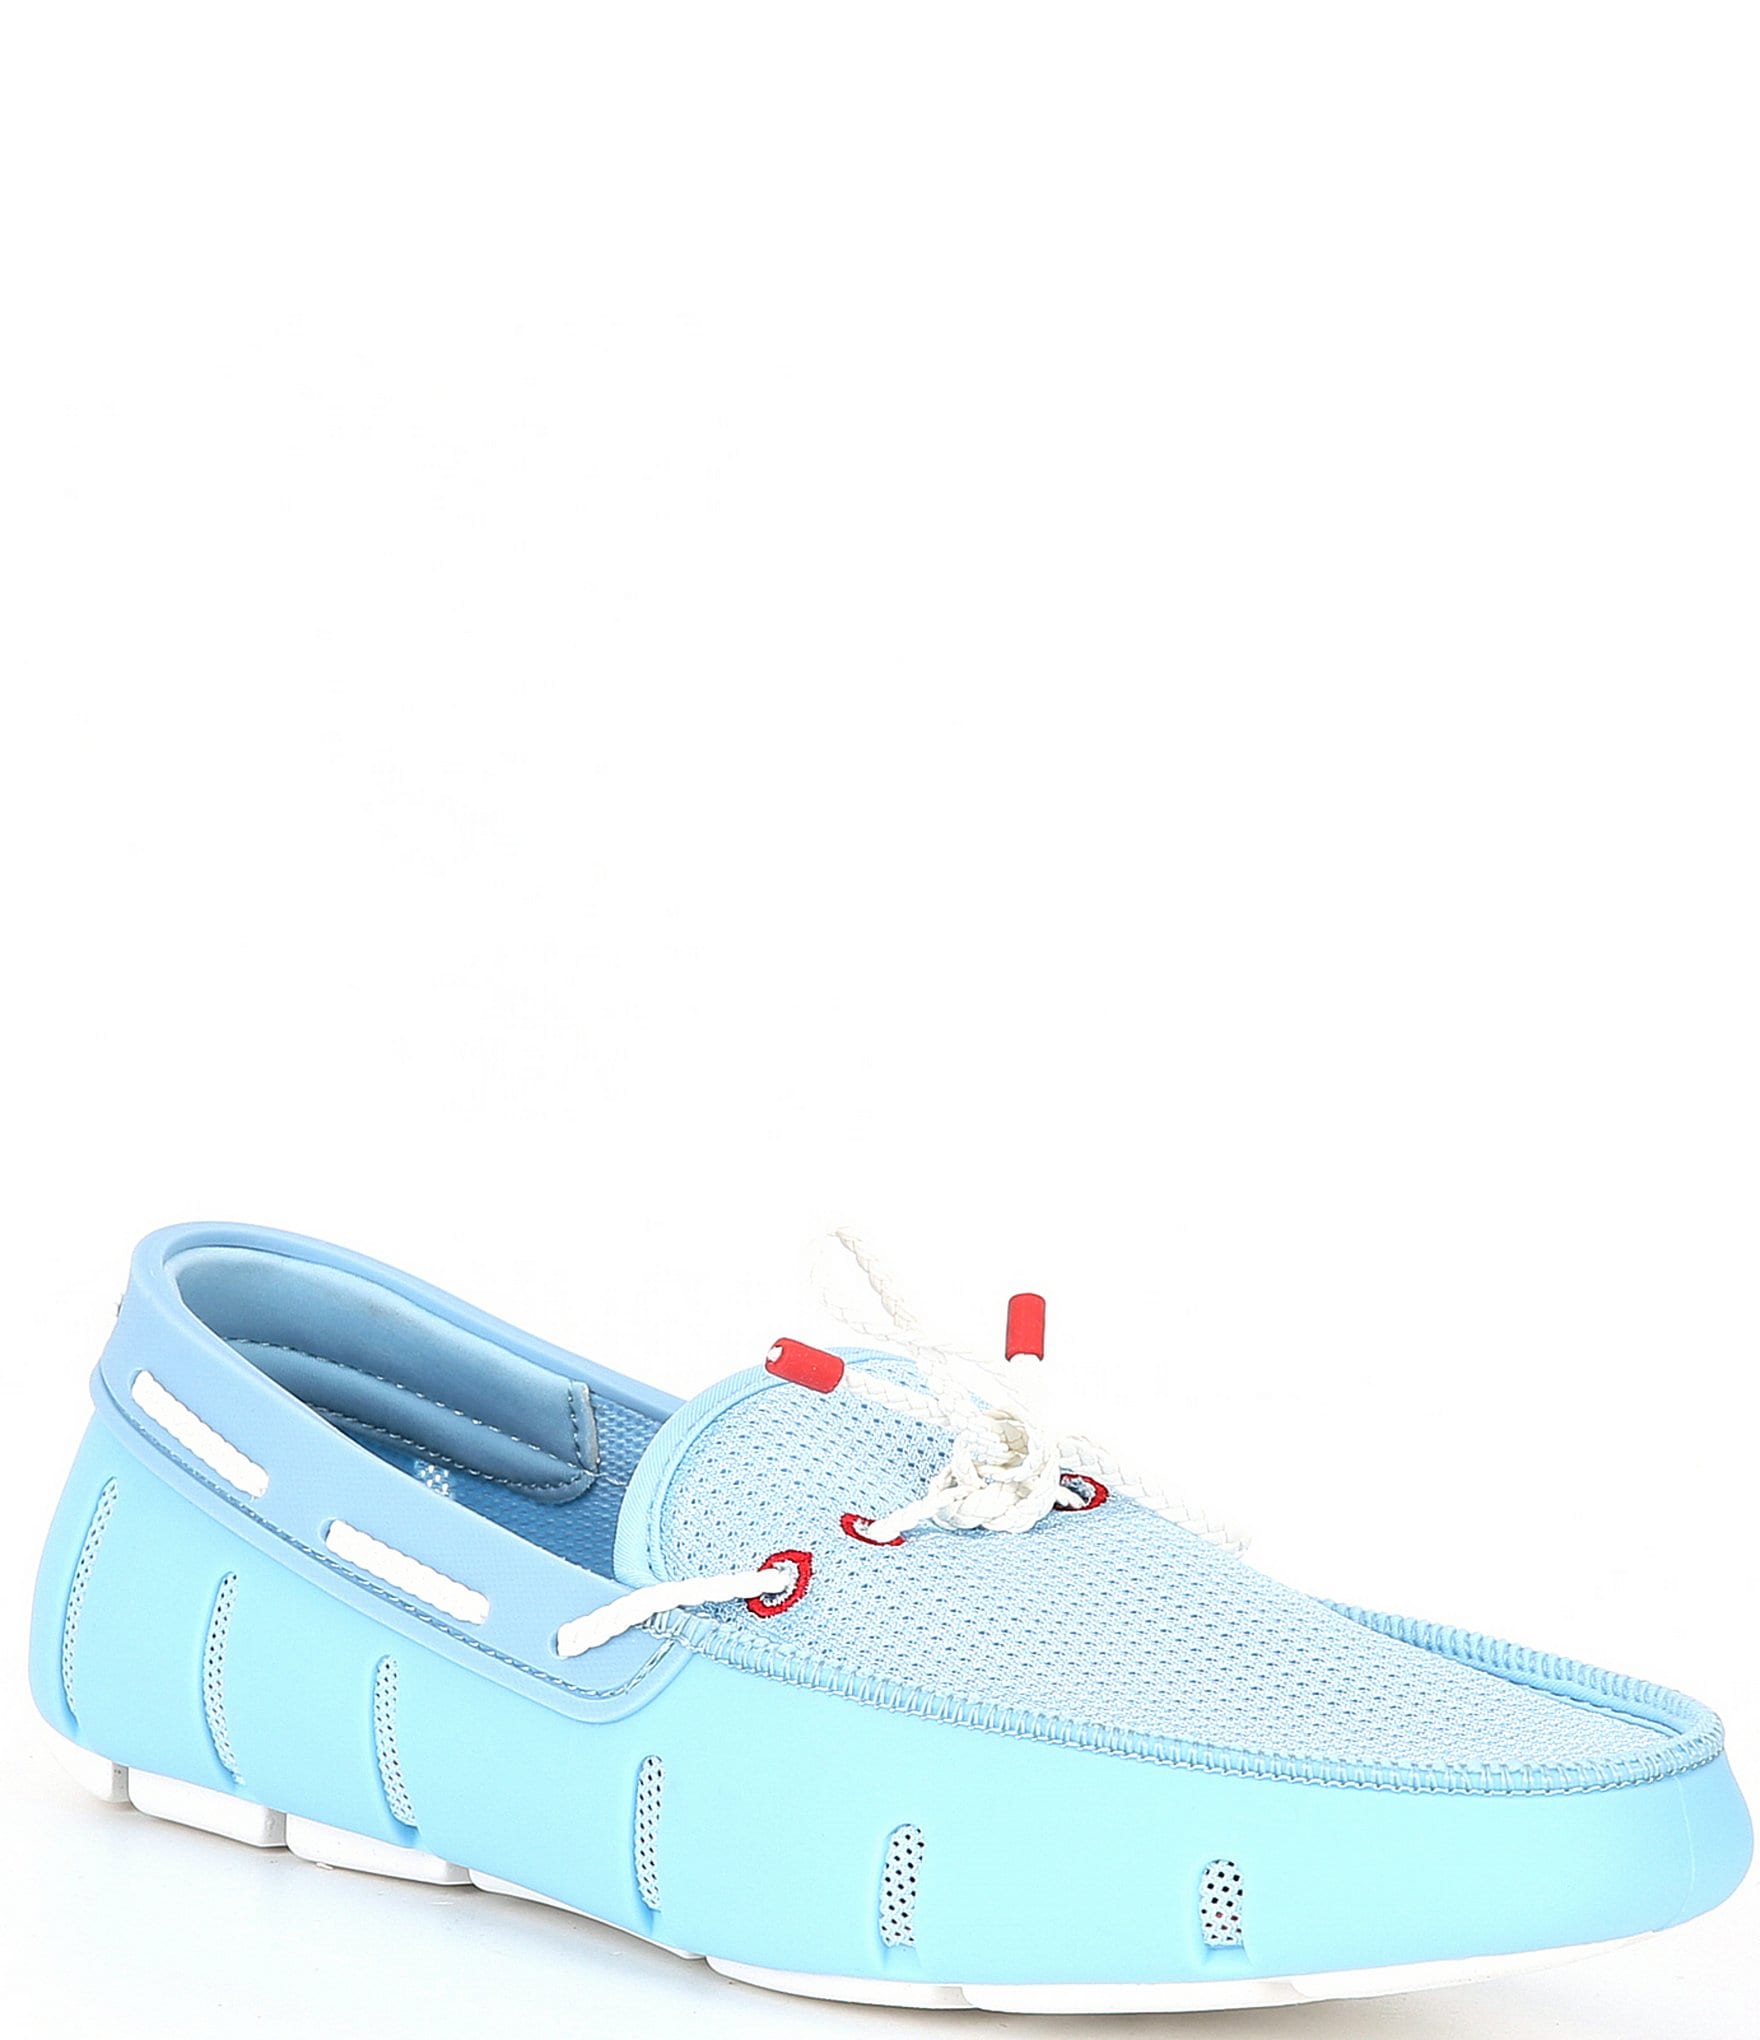 Braided Lace Washable Boat Loafers | Dillard's